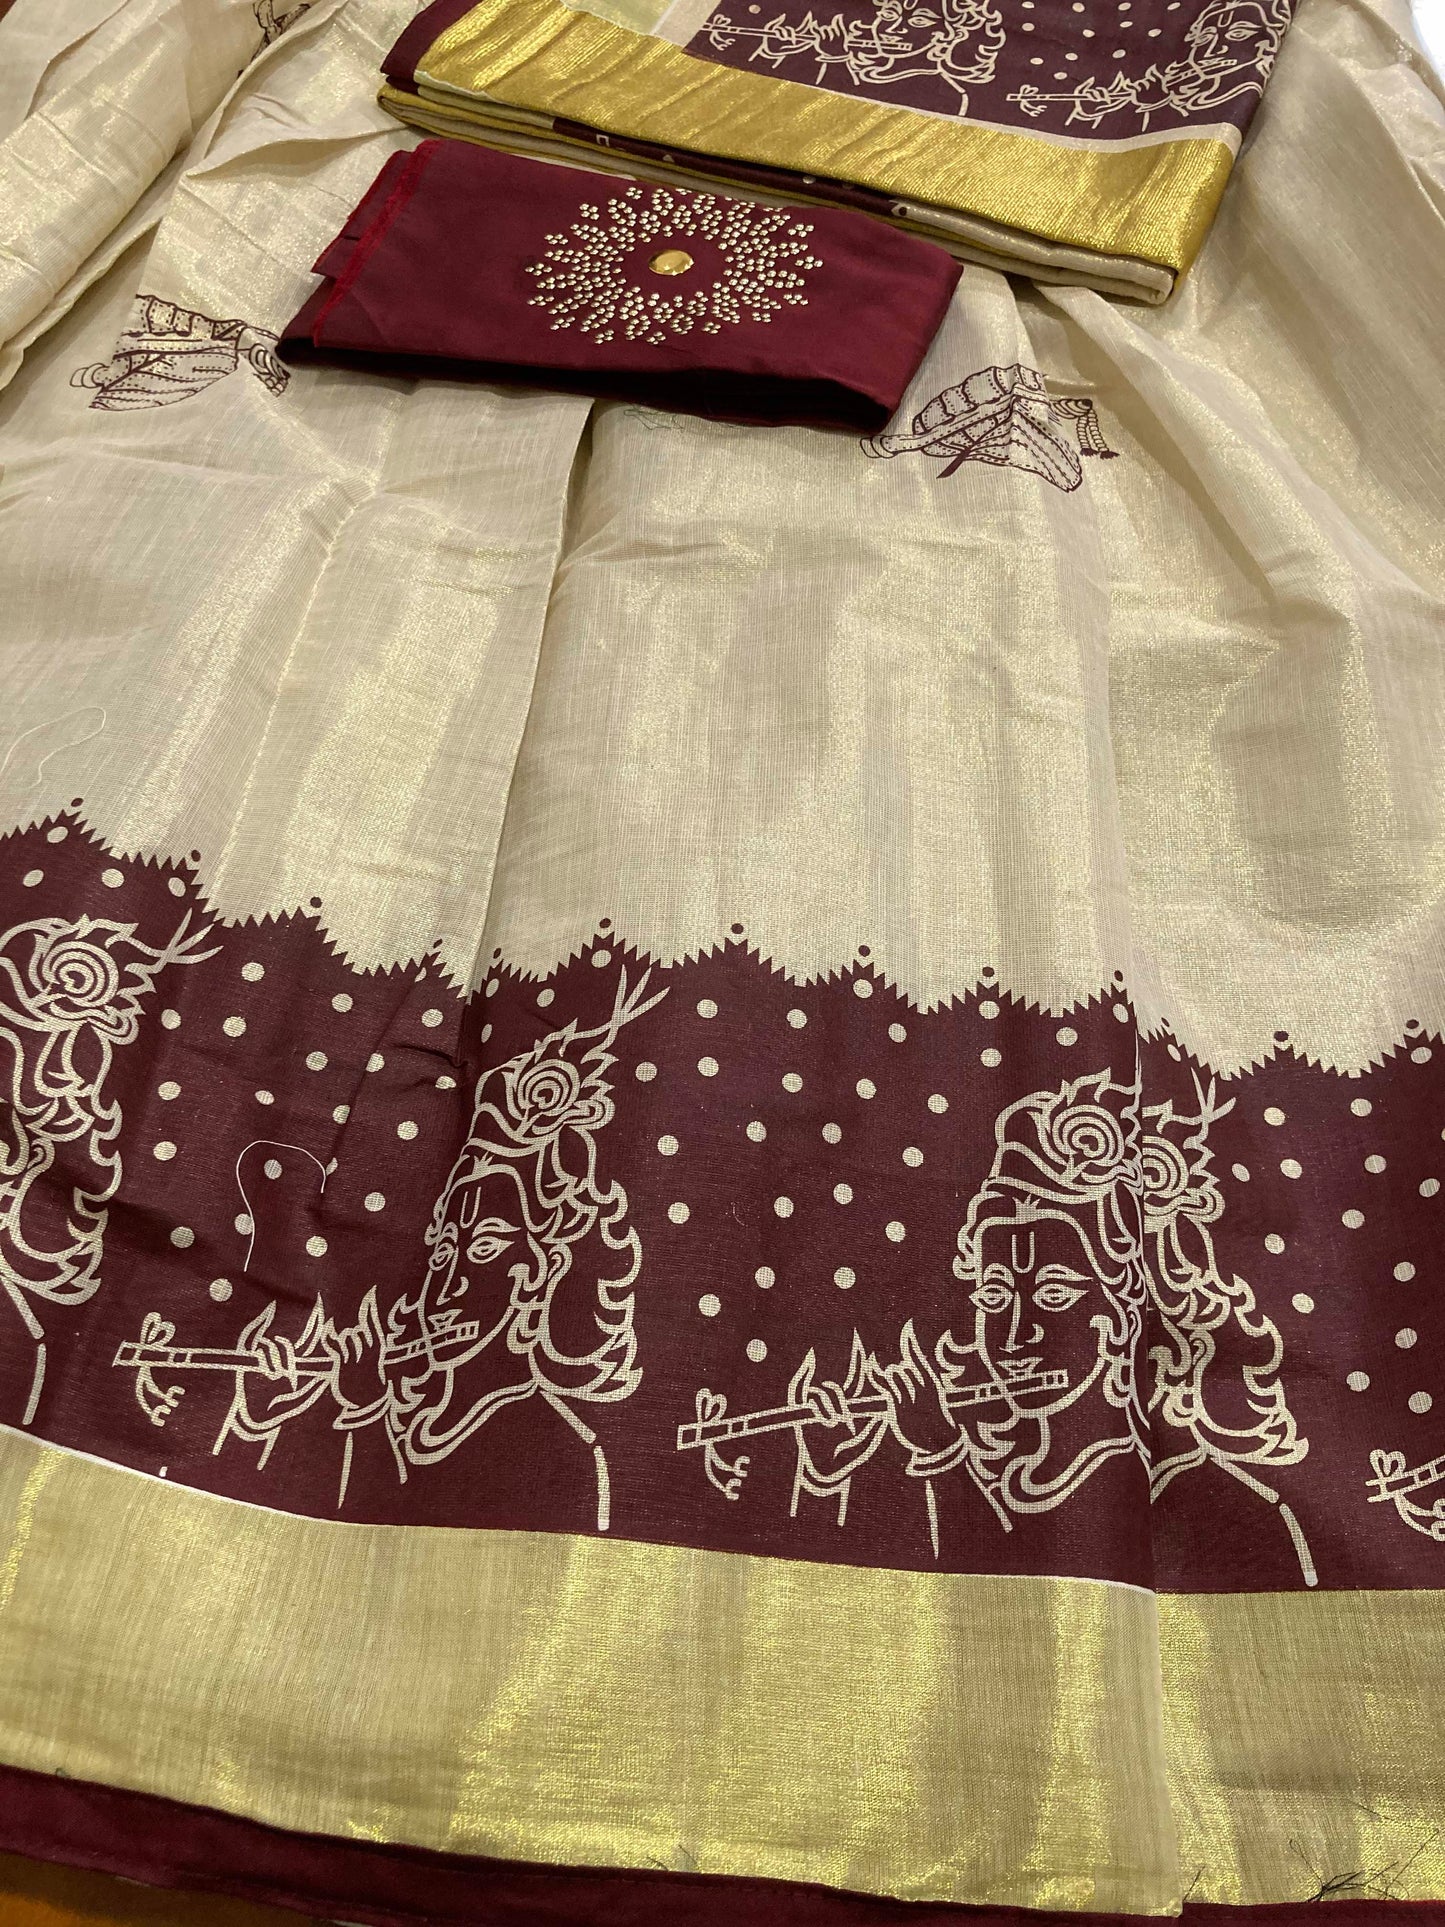 Kerala Tissue Stitched Dhavani Set with Blouse Piece and Neriyathu in with Maroon Accents and Mural Designs